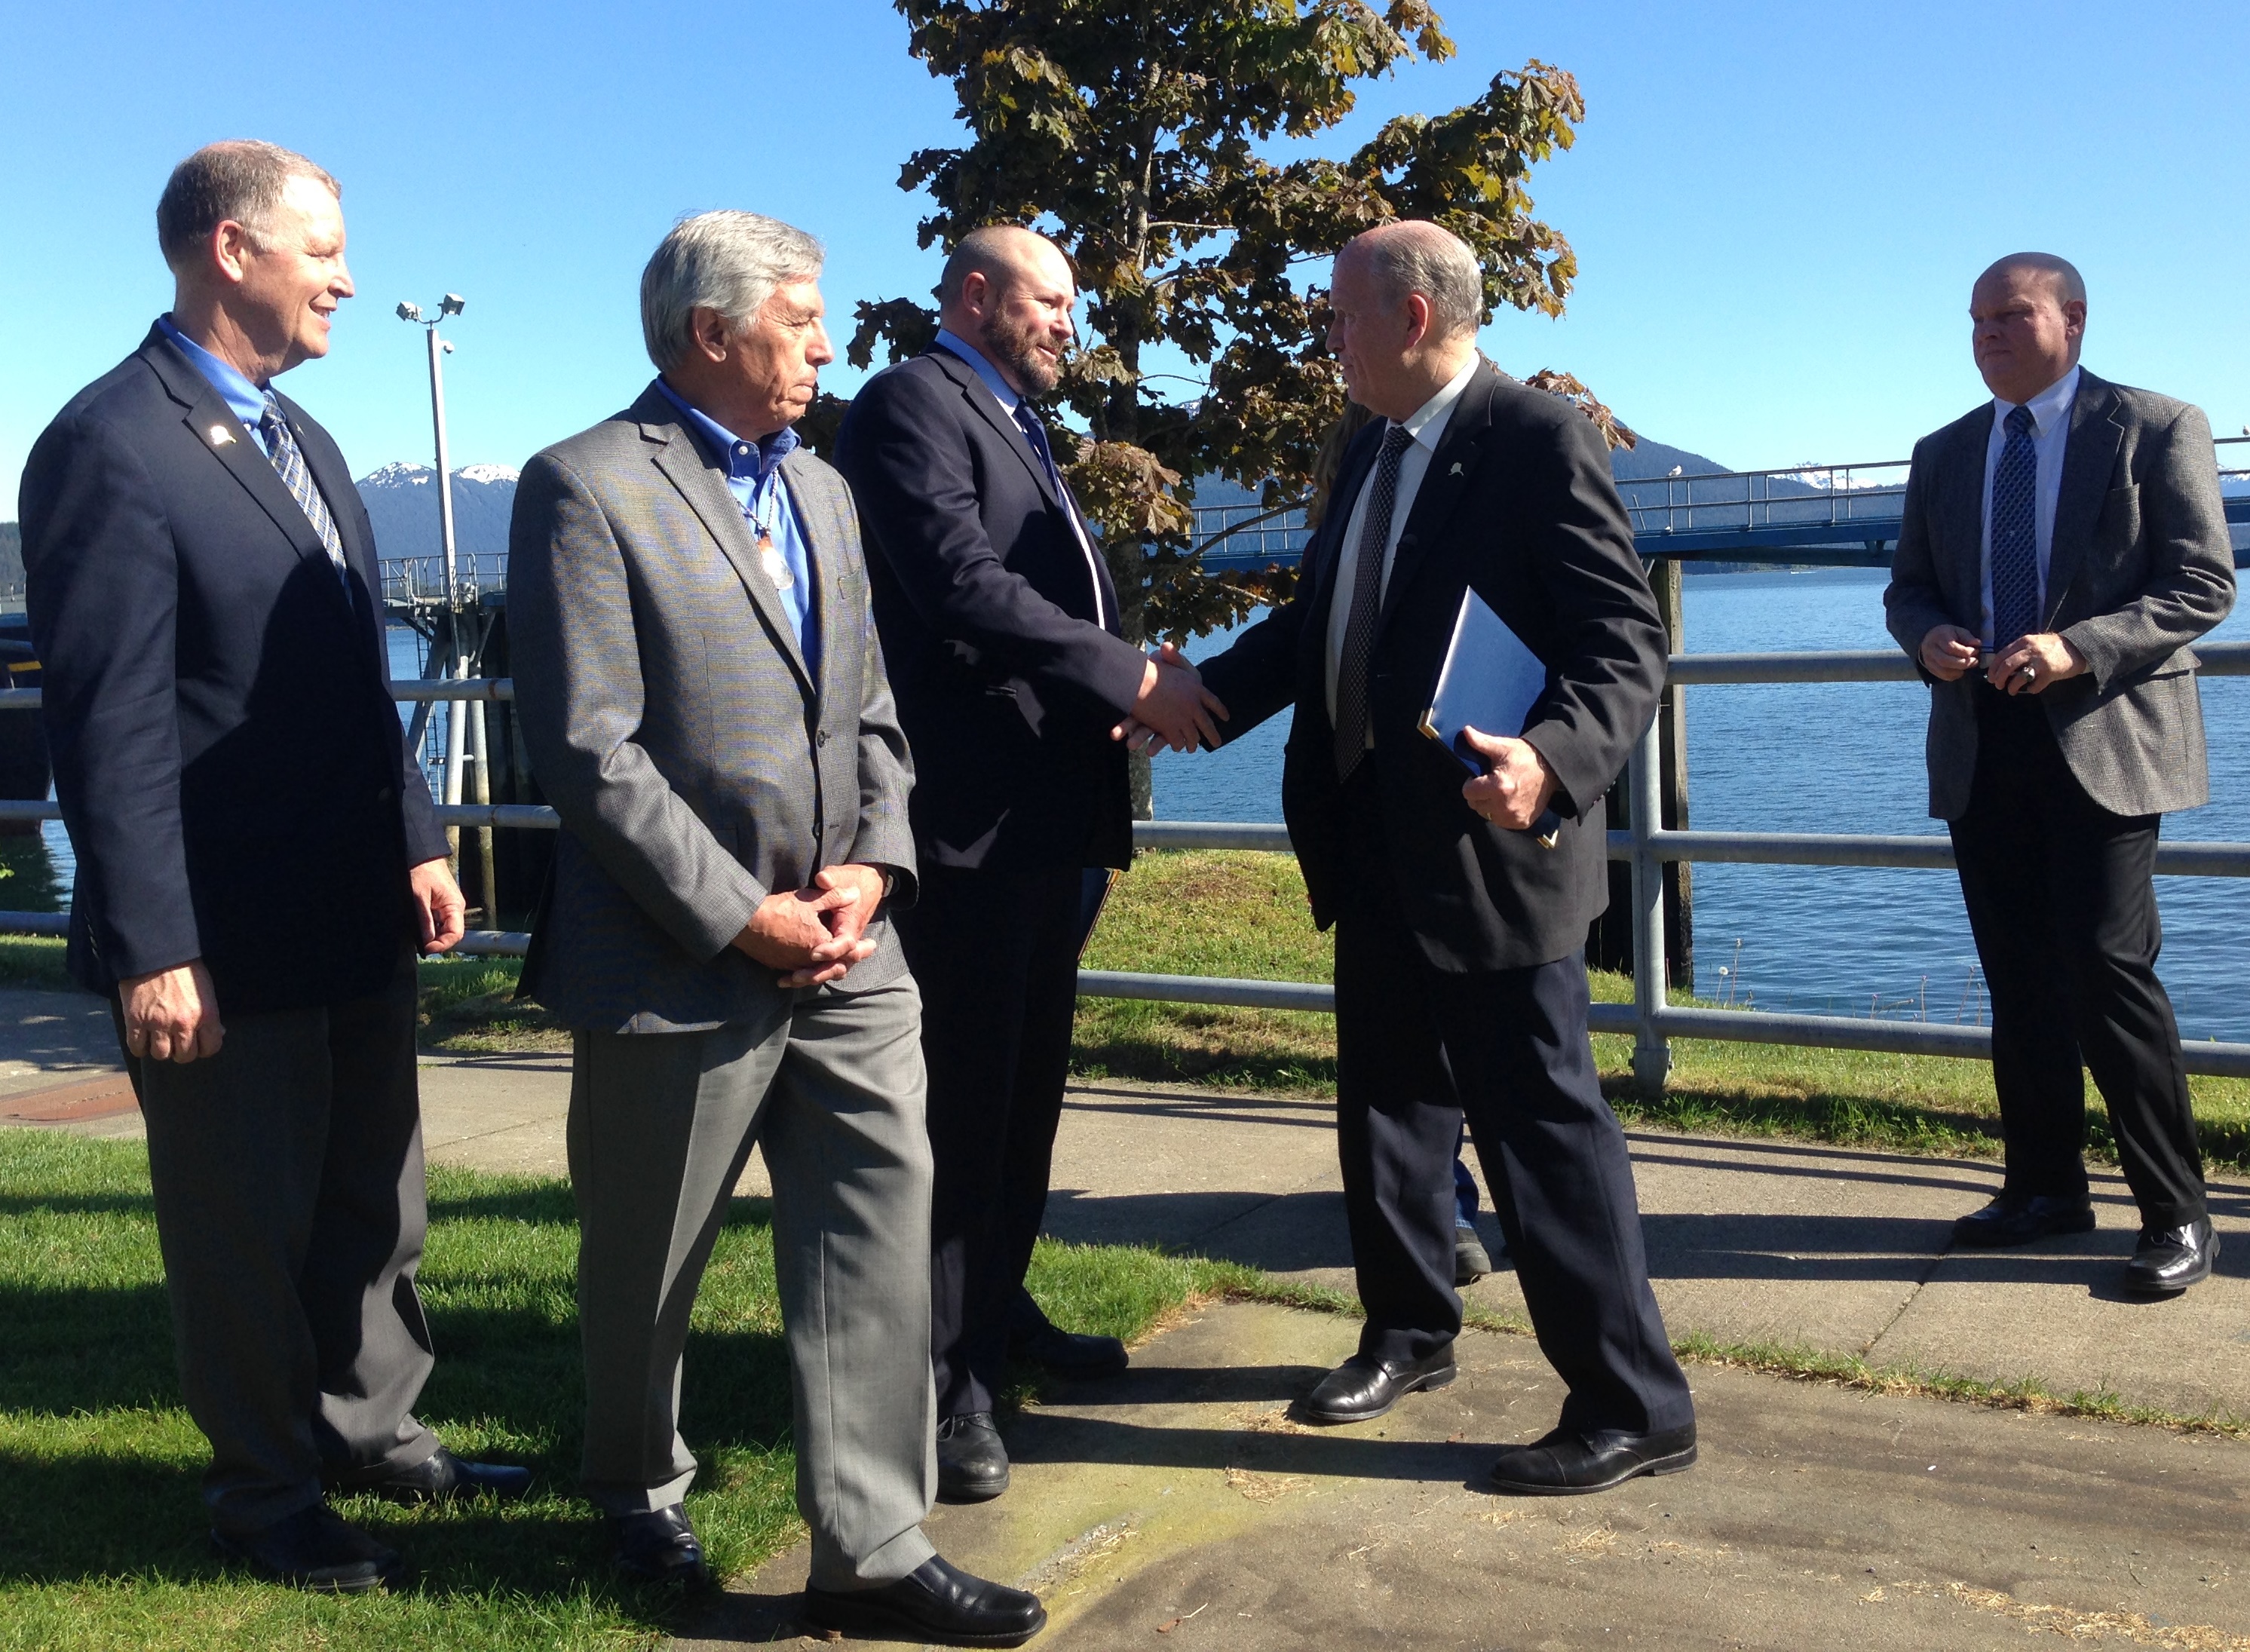 Gov. Bill Walker shakes hands with Southeast Conference President Gary White on Thursday at the Auke Bay Ferry terminal after signing an agreement to consider changes to Marine highway management. Transportation Commissioner Marc Luiken, left, Lt. Gov. Byron Mallott, second from left, and ferry Capt. Mike Neussl, right, look on. (Photo by Ed Schoenfeld,CoastAlaska - Juneau)